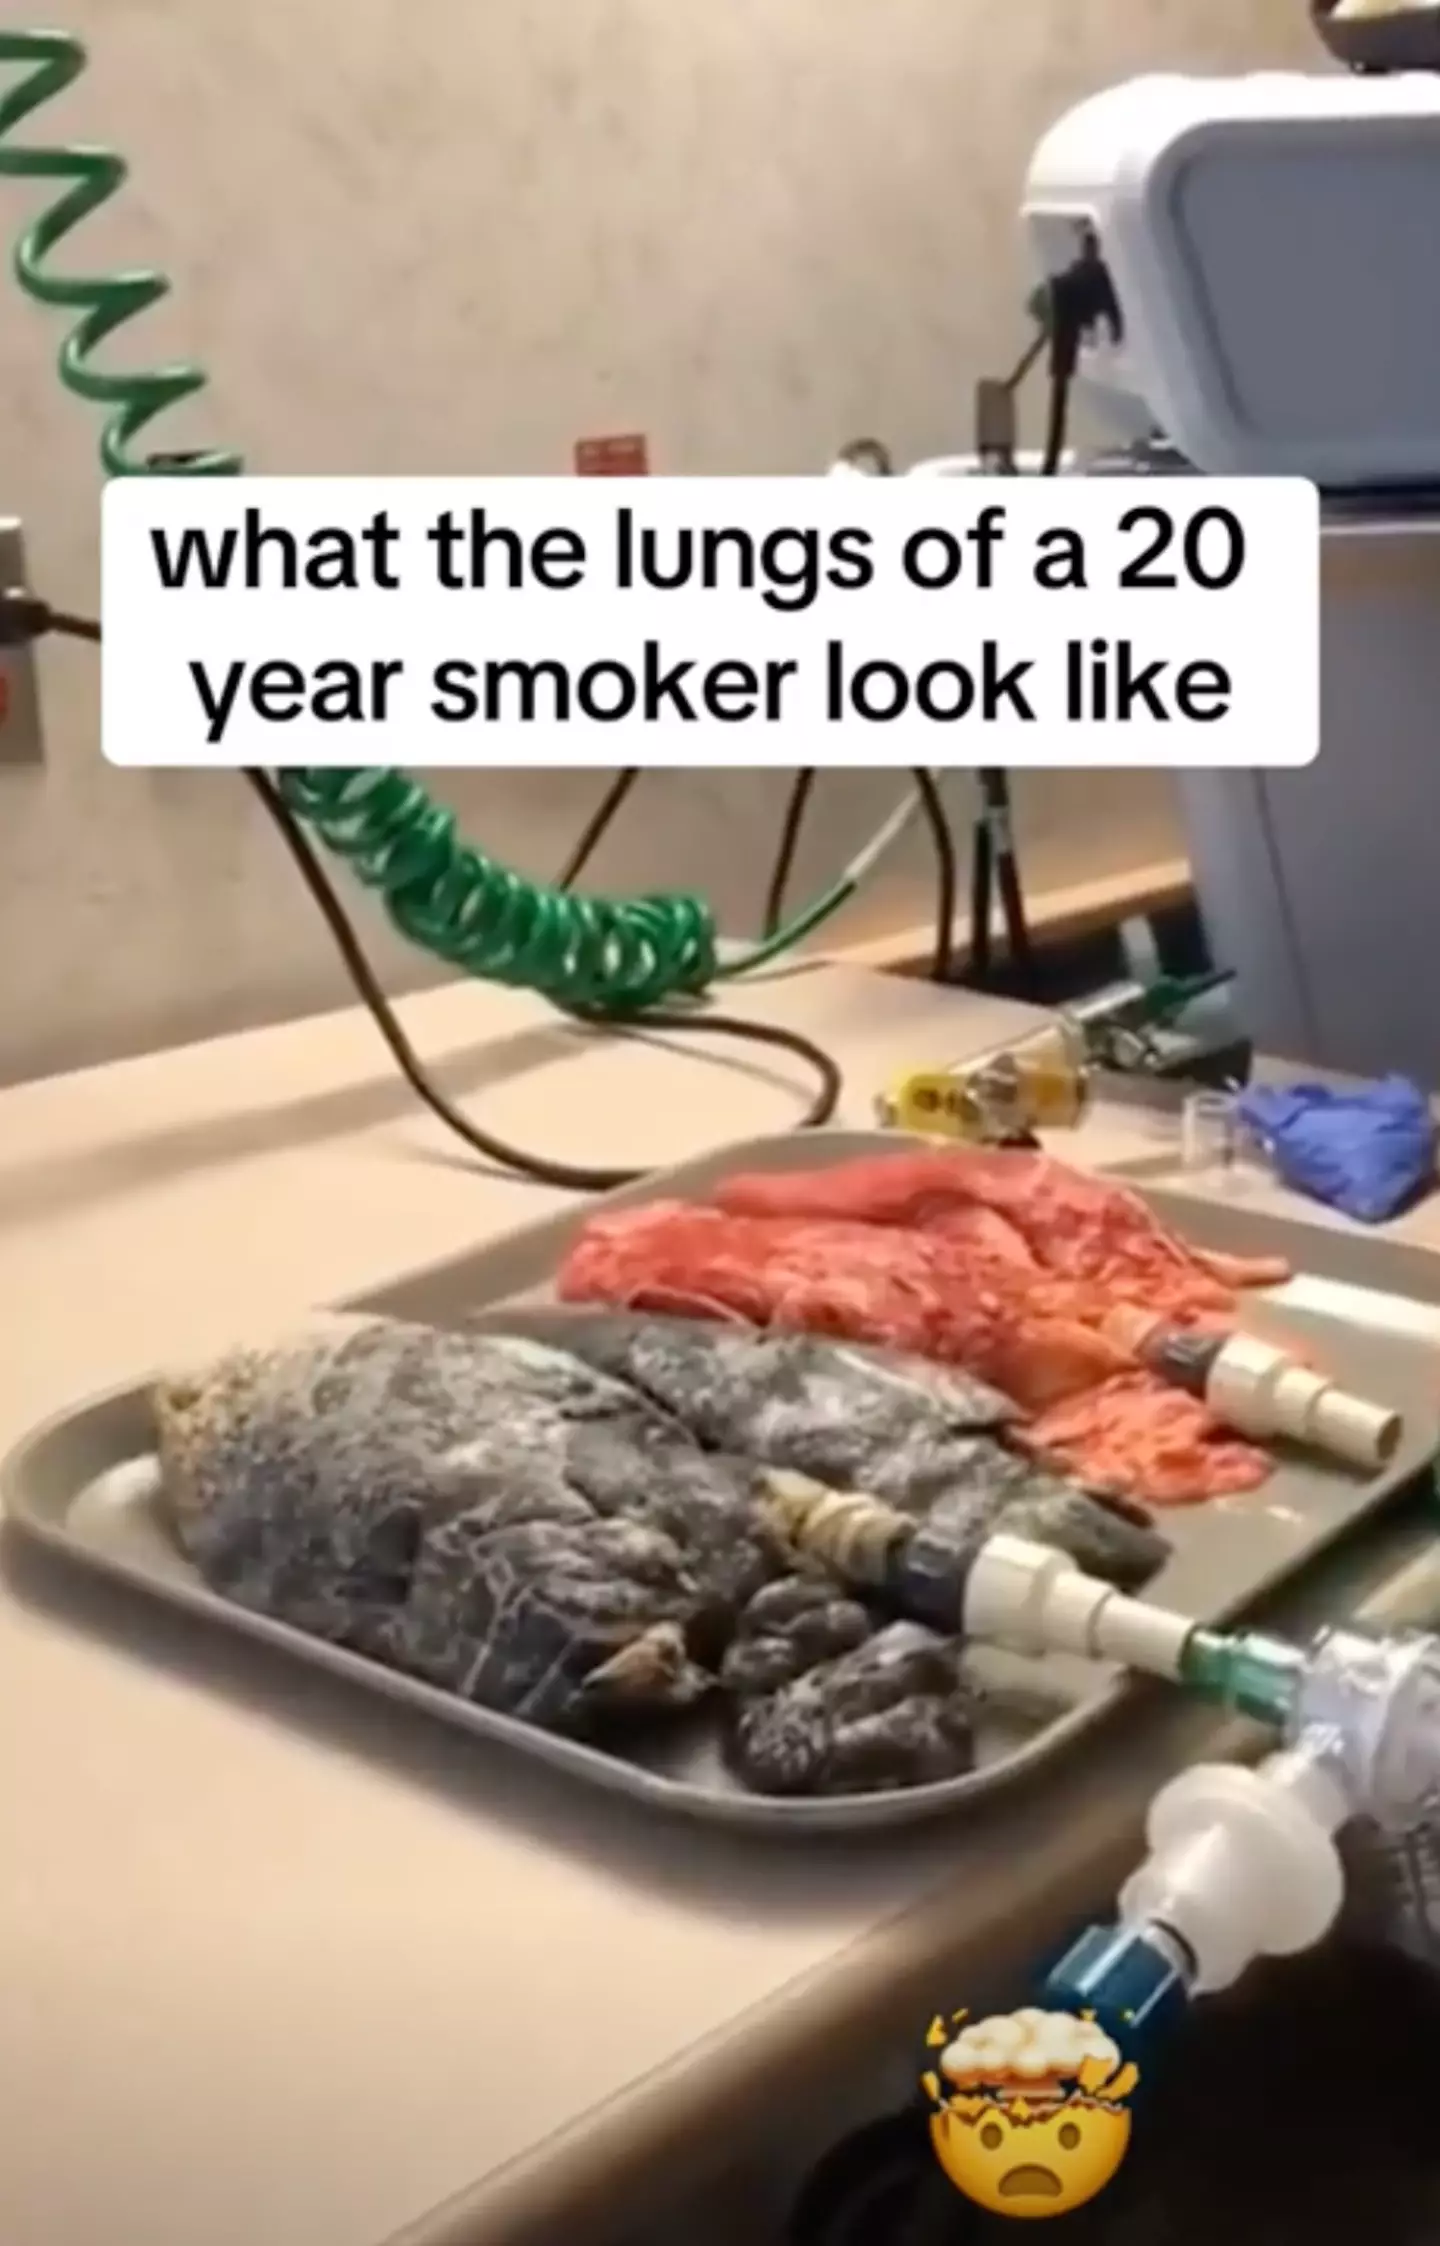 The nurse showed the horrifying difference between a smoker's set of lungs and a non-smoker's.